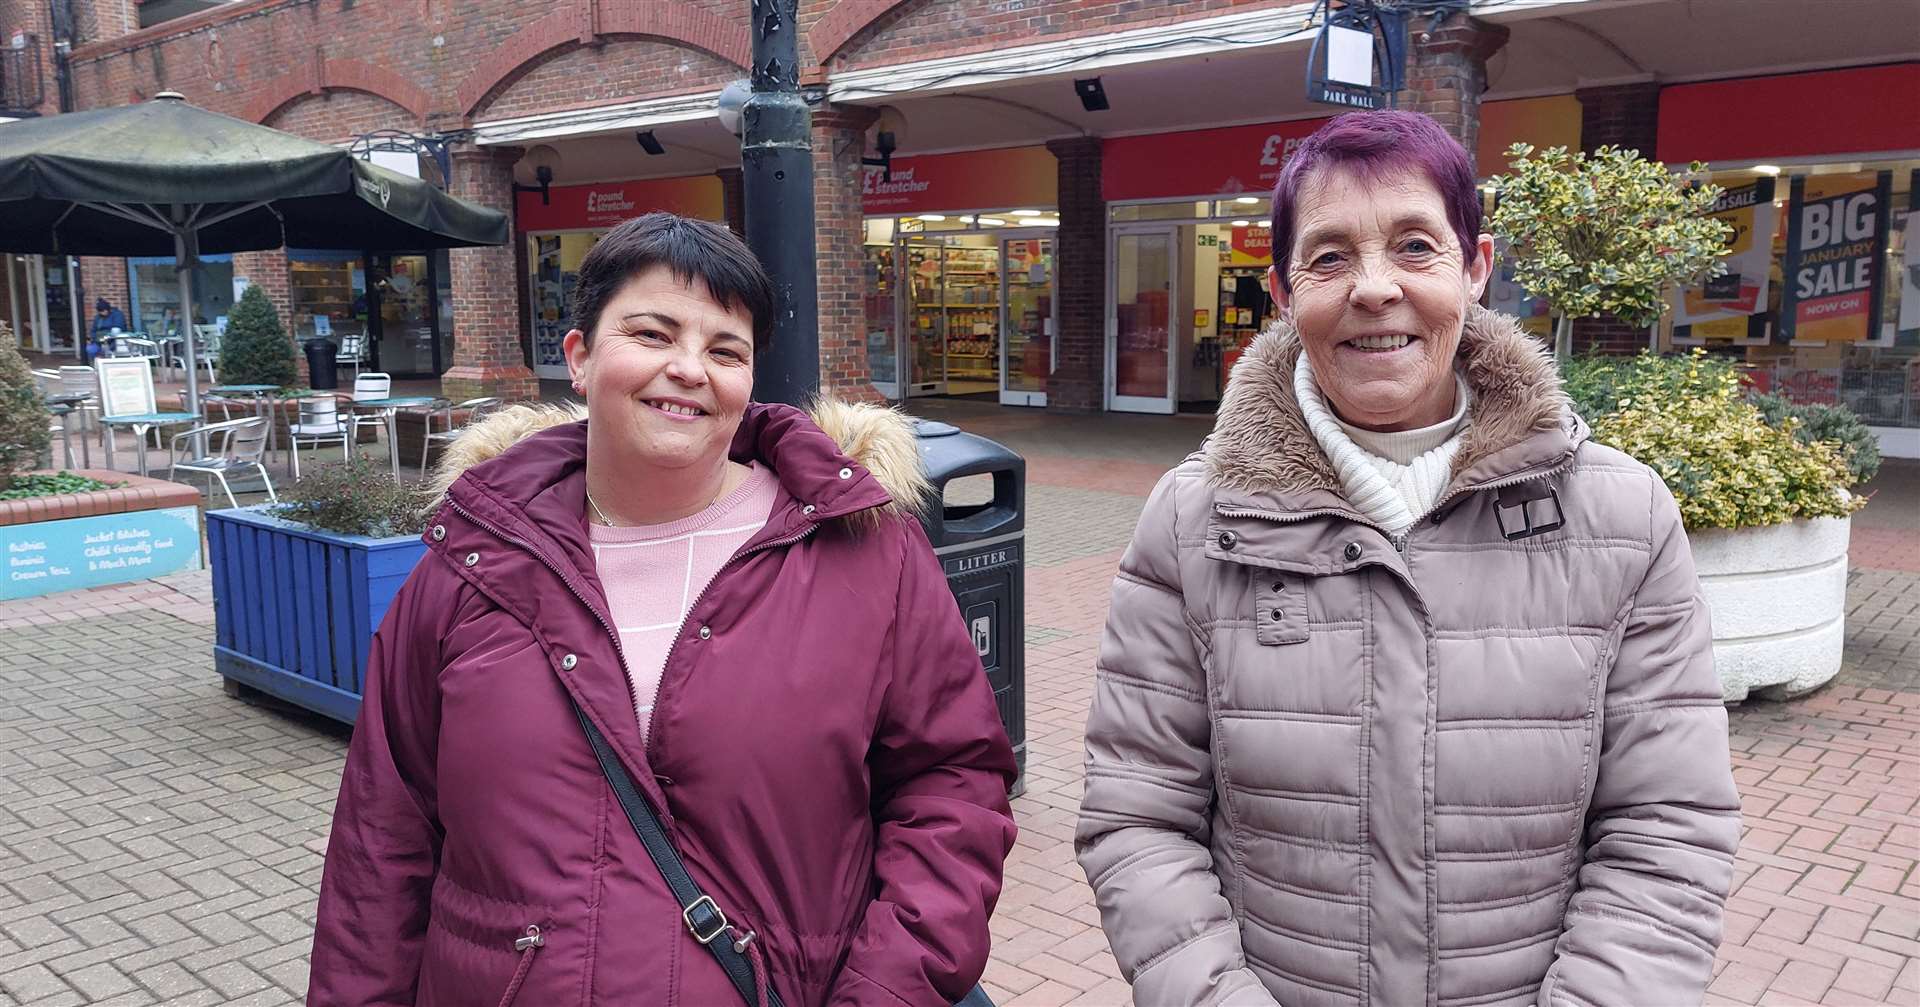 Denise Veryard, right, pictured with Joanne Veryard, would like to see more shops open in Park Mall